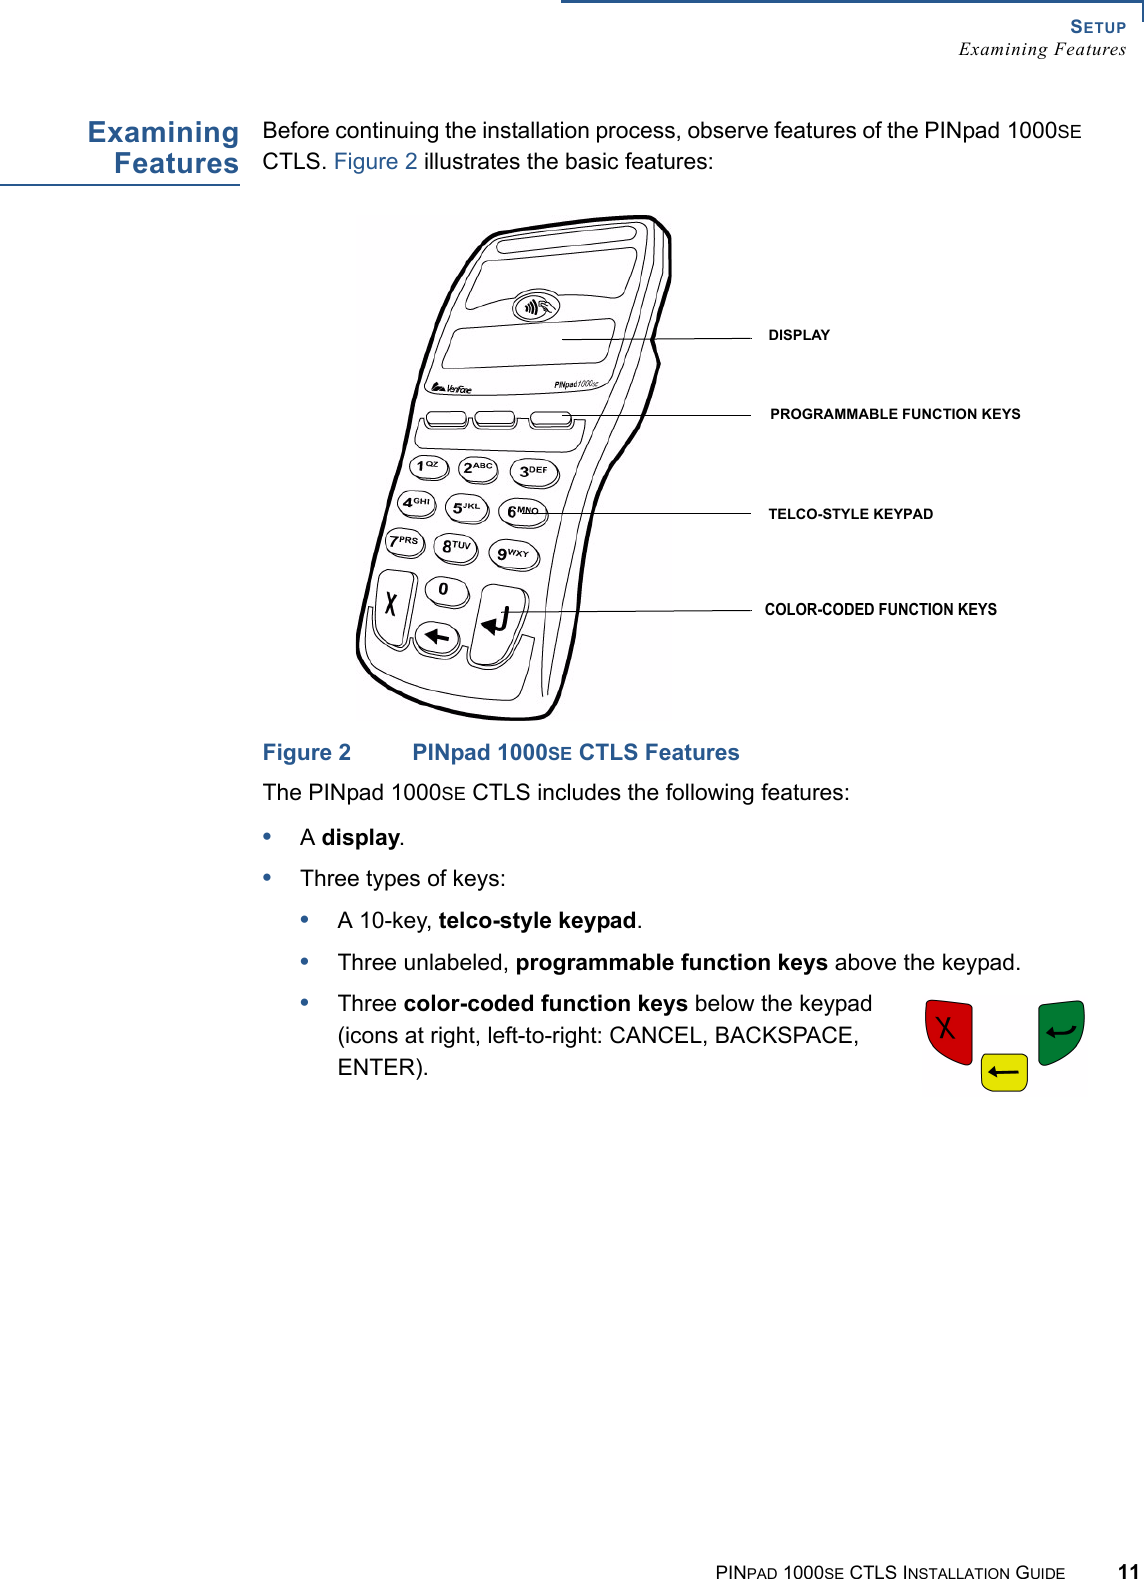 SETUPExamining FeaturesPINPAD 1000SE CTLS INSTALLATION GUIDE 11ExaminingFeaturesBefore continuing the installation process, observe features of the PINpad 1000SE CTLS. Figure 2 illustrates the basic features:Figure 2 PINpad 1000SE CTLS FeaturesThe PINpad 1000SE CTLS includes the following features:•A display.•Three types of keys:•A 10-key, telco-style keypad.•Three unlabeled, programmable function keys above the keypad.•Three color-coded function keys below the keypad (icons at right, left-to-right: CANCEL, BACKSPACE, ENTER). DISPLAYTELCO-STYLE KEYPADPROGRAMMABLE FUNCTION KEYSCOLOR-CODED FUNCTION KEYS